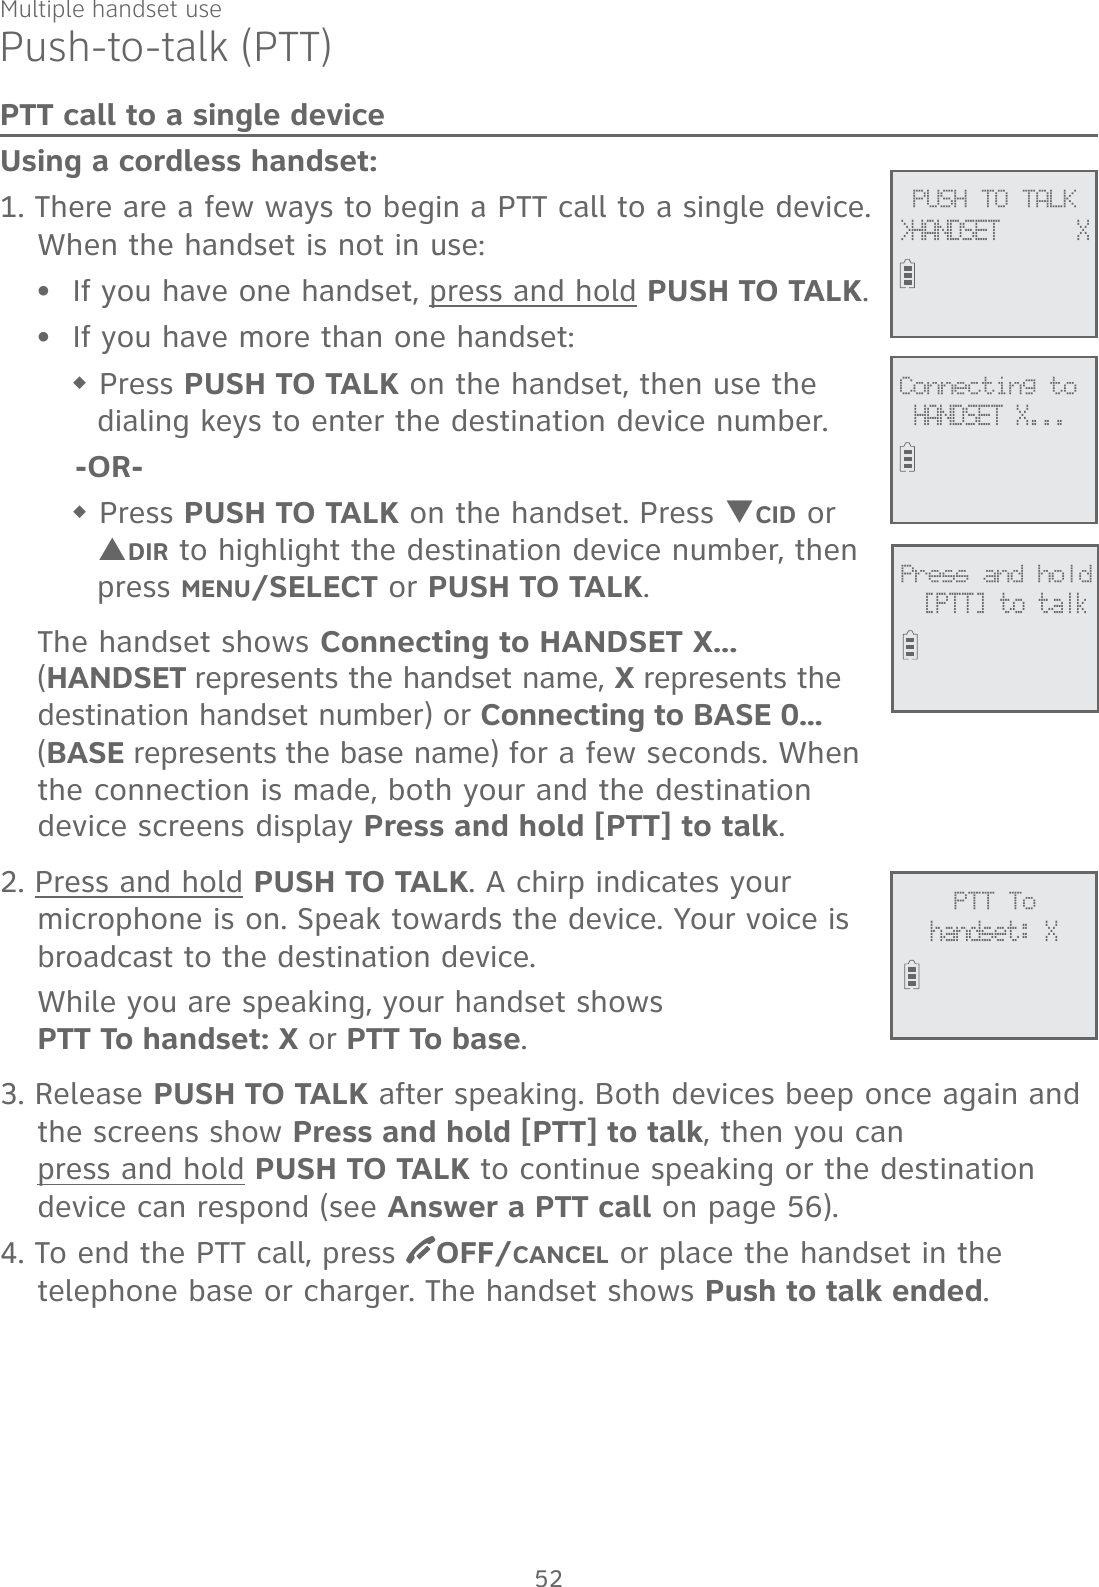 Multiple handset usePush-to-talk (PTT)PTT call to a single deviceUsing a cordless handset:1. There are a few ways to begin a PTT call to a single device. When the handset is not in use:If you have one handset, press and hold PUSH TO TALK.If you have more than one handset: Press PUSH TO TALK on the handset, then use the dialing keys to enter the destination device number.-OR- Press PUSH TO TALK on the handset. Press TCID or SDIR to highlight the destination device number, then press MENU/SELECT or PUSH TO TALK.The handset shows Connecting to HANDSET X... (HANDSET represents the handset name, X represents the destination handset number) or Connecting to BASE 0...  (BASE represents the base name) for a few seconds. When the connection is made, both your and the destination  device screens display Press and hold [PTT] to talk. 2. Press and hold PUSH TO TALK. A chirp indicates your microphone is on. Speak towards the device. Your voice is broadcast to the destination device.While you are speaking, your handset shows  PTT To handset: X or PTT To base.3. Release PUSH TO TALK after speaking. Both devices beep once again and the screens show Press and hold [PTT] to talk, then you can  press and hold PUSH TO TALK to continue speaking or the destination device can respond (see Answer a PTT call on page 56).4. To end the PTT call, press  OFF/CANCEL or place the handset in the telephone base or charger. The handset shows Push to talk ended.••             PTT Tohandset: X             PUSH TO TALK&gt;HANDSET      X             Connecting toHANDSET X...             Press and hold[PTT] to talk52